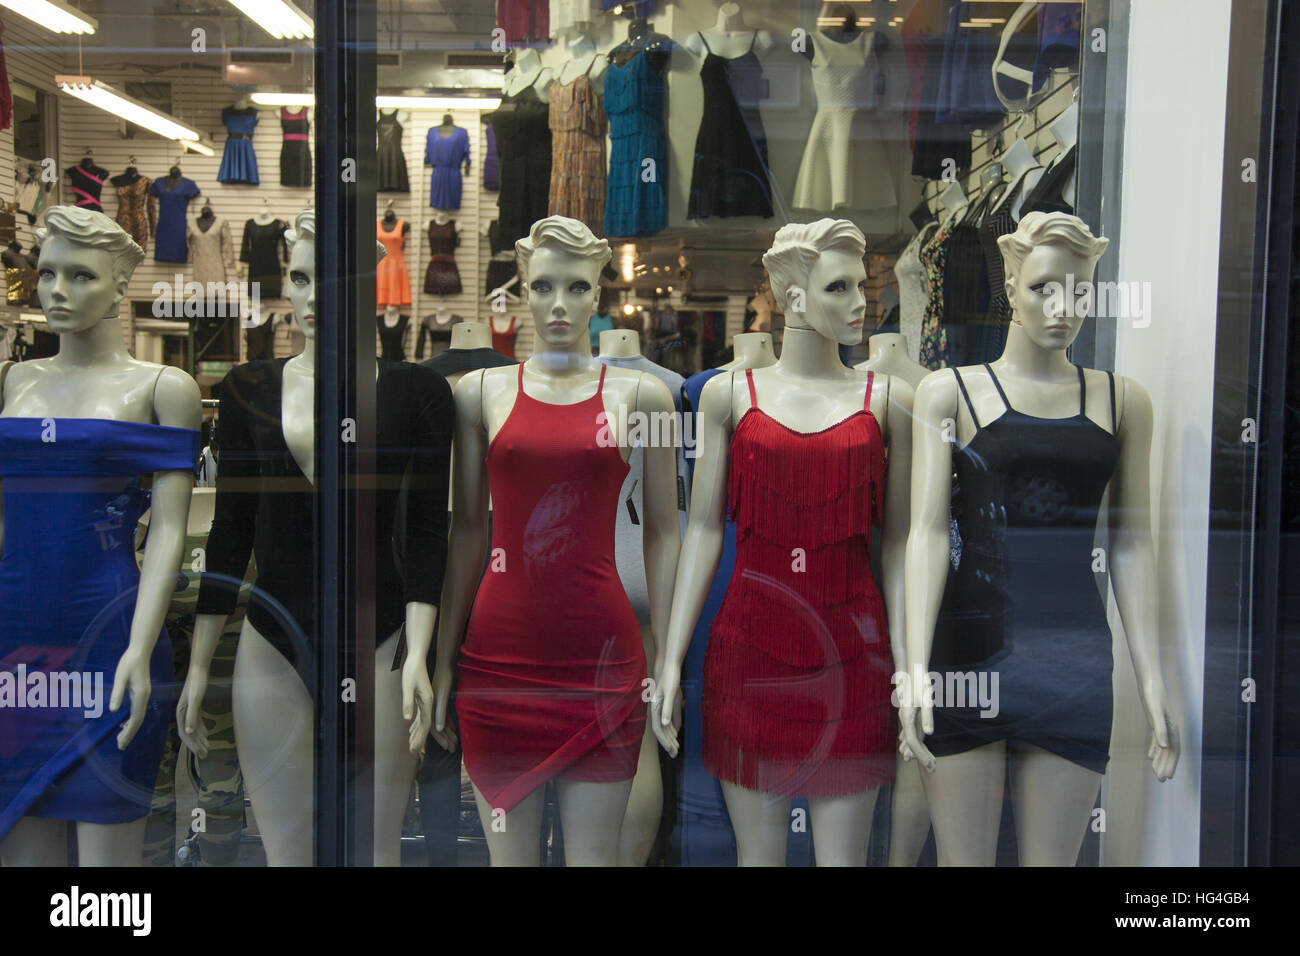 Dressed mannequins at a fashion outlet in the Garment District in Manhattan, NYC. Stock Photo